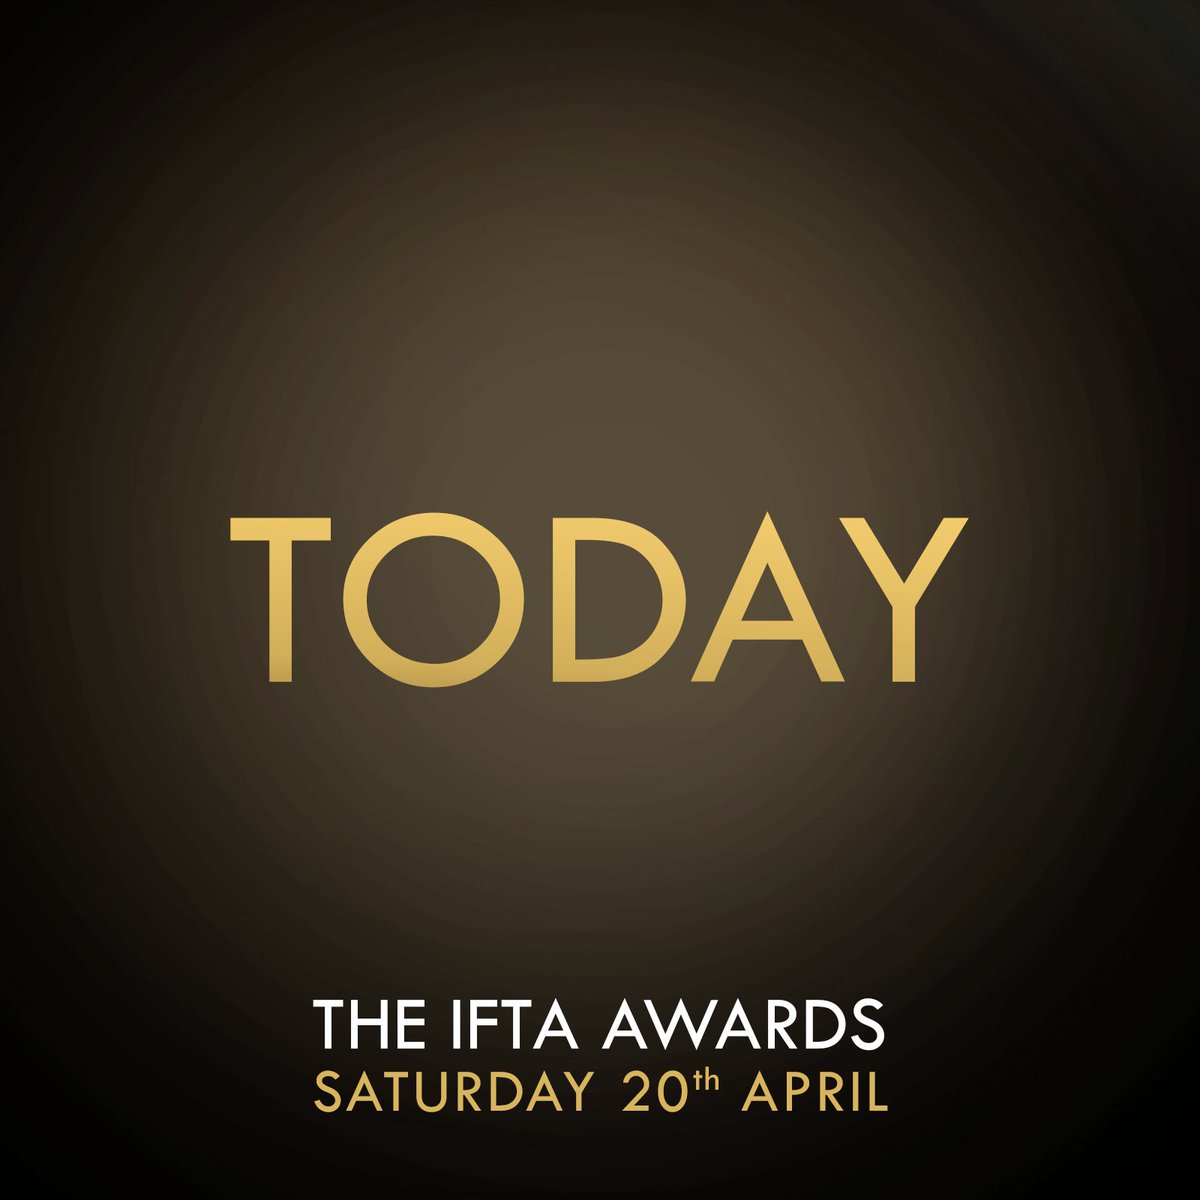 Today's the day for the 21st Anniversary IFTA Awards! Tune into our Red Carpet LIVE on TikTok from 5.15pm: tiktok.com/live/event/735… #IFTA